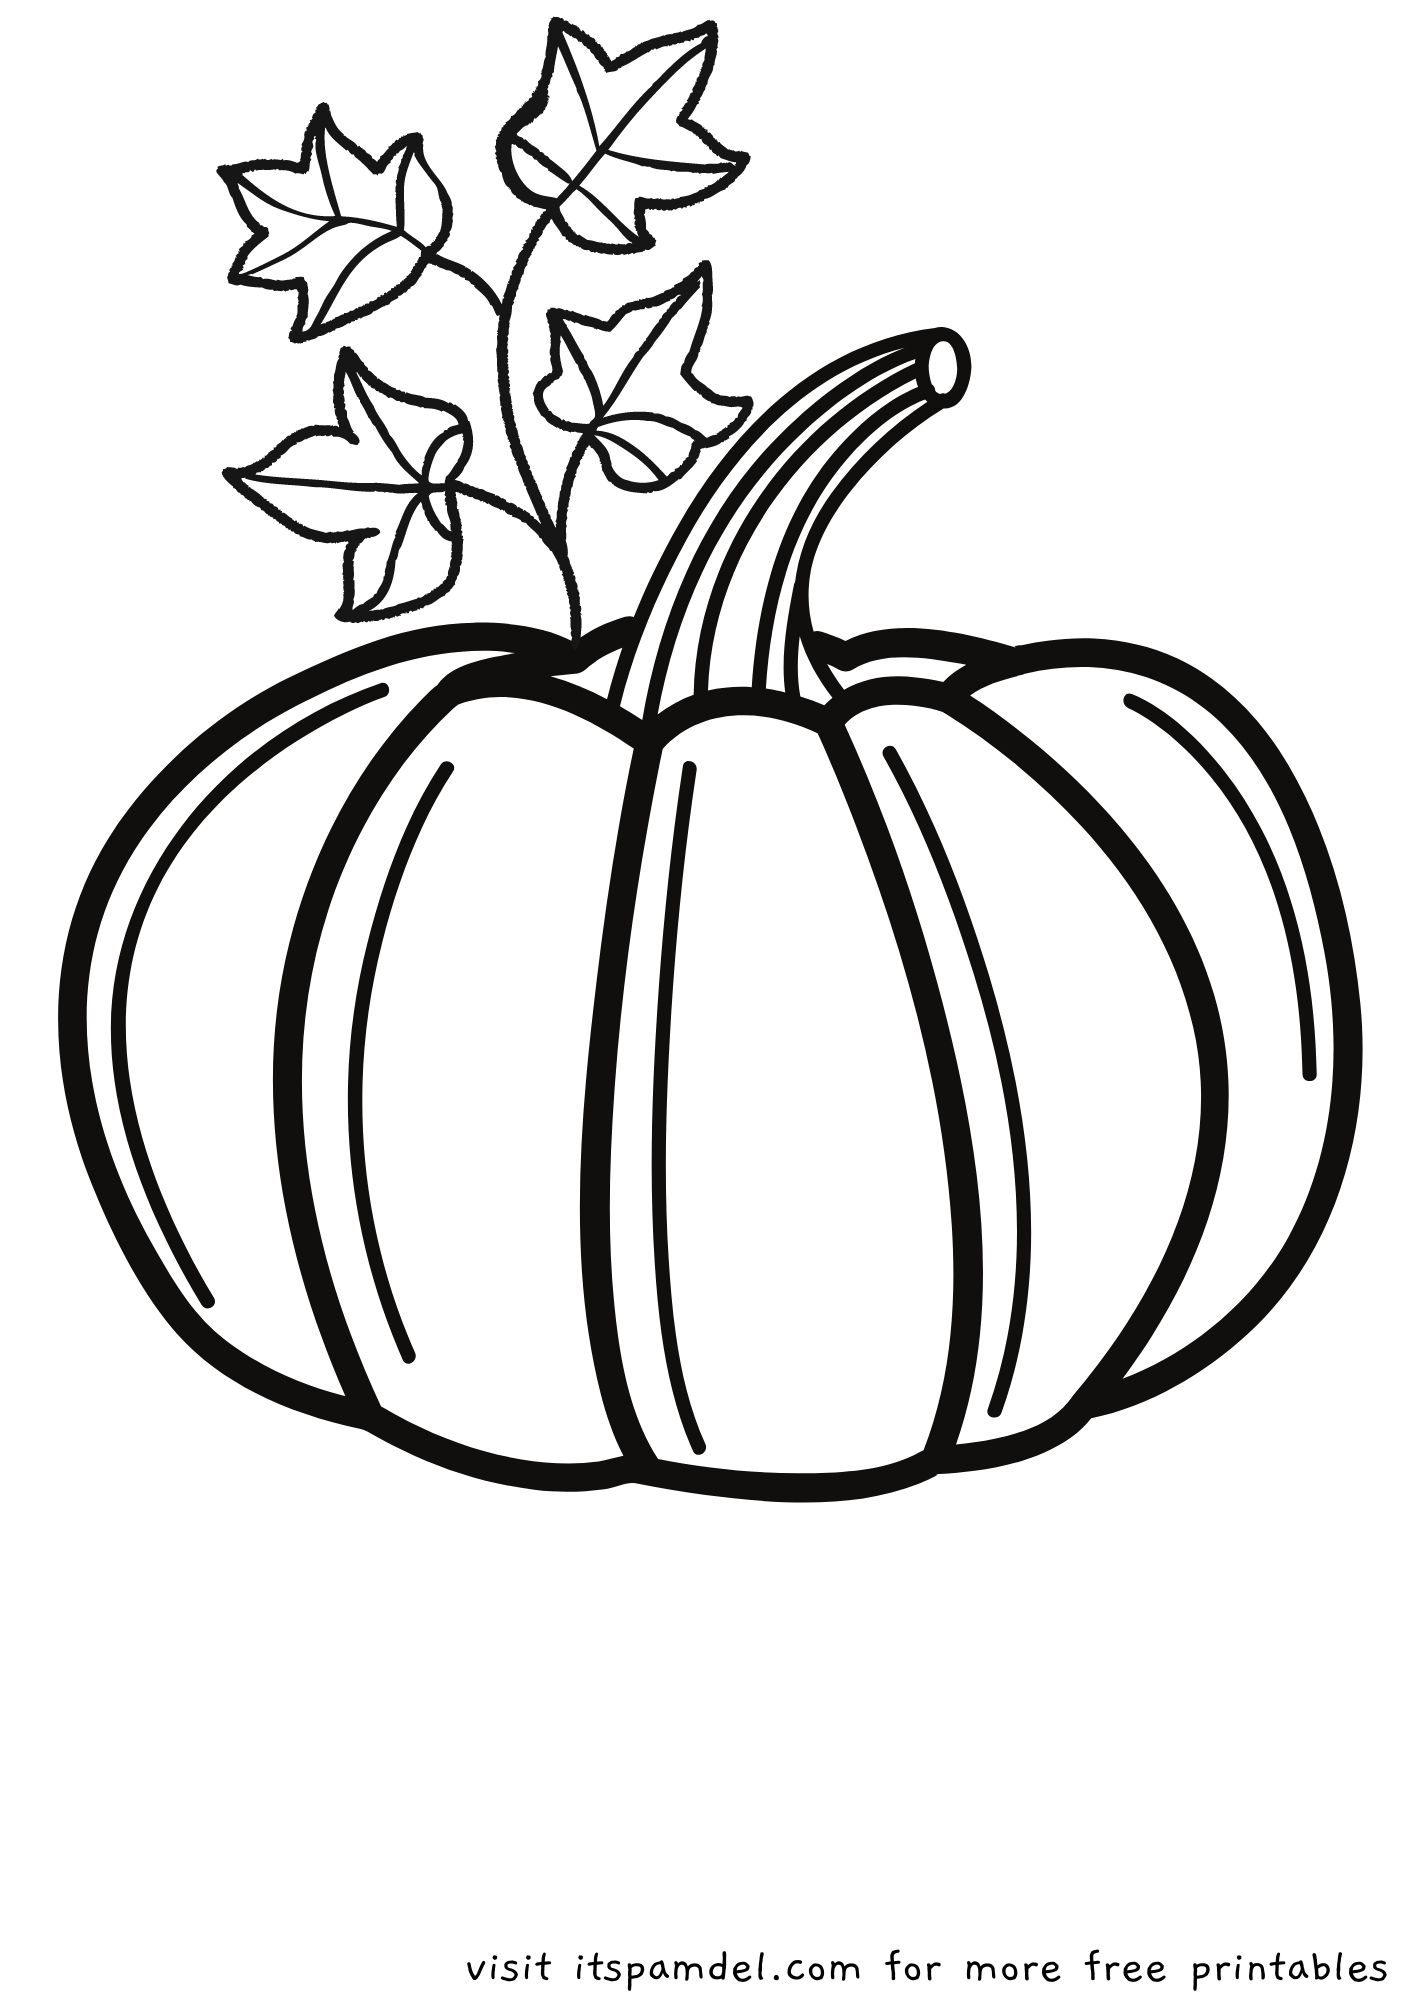 snoopy-fall-leaves-coloring-page-fall-leaves-coloring-pages-fall